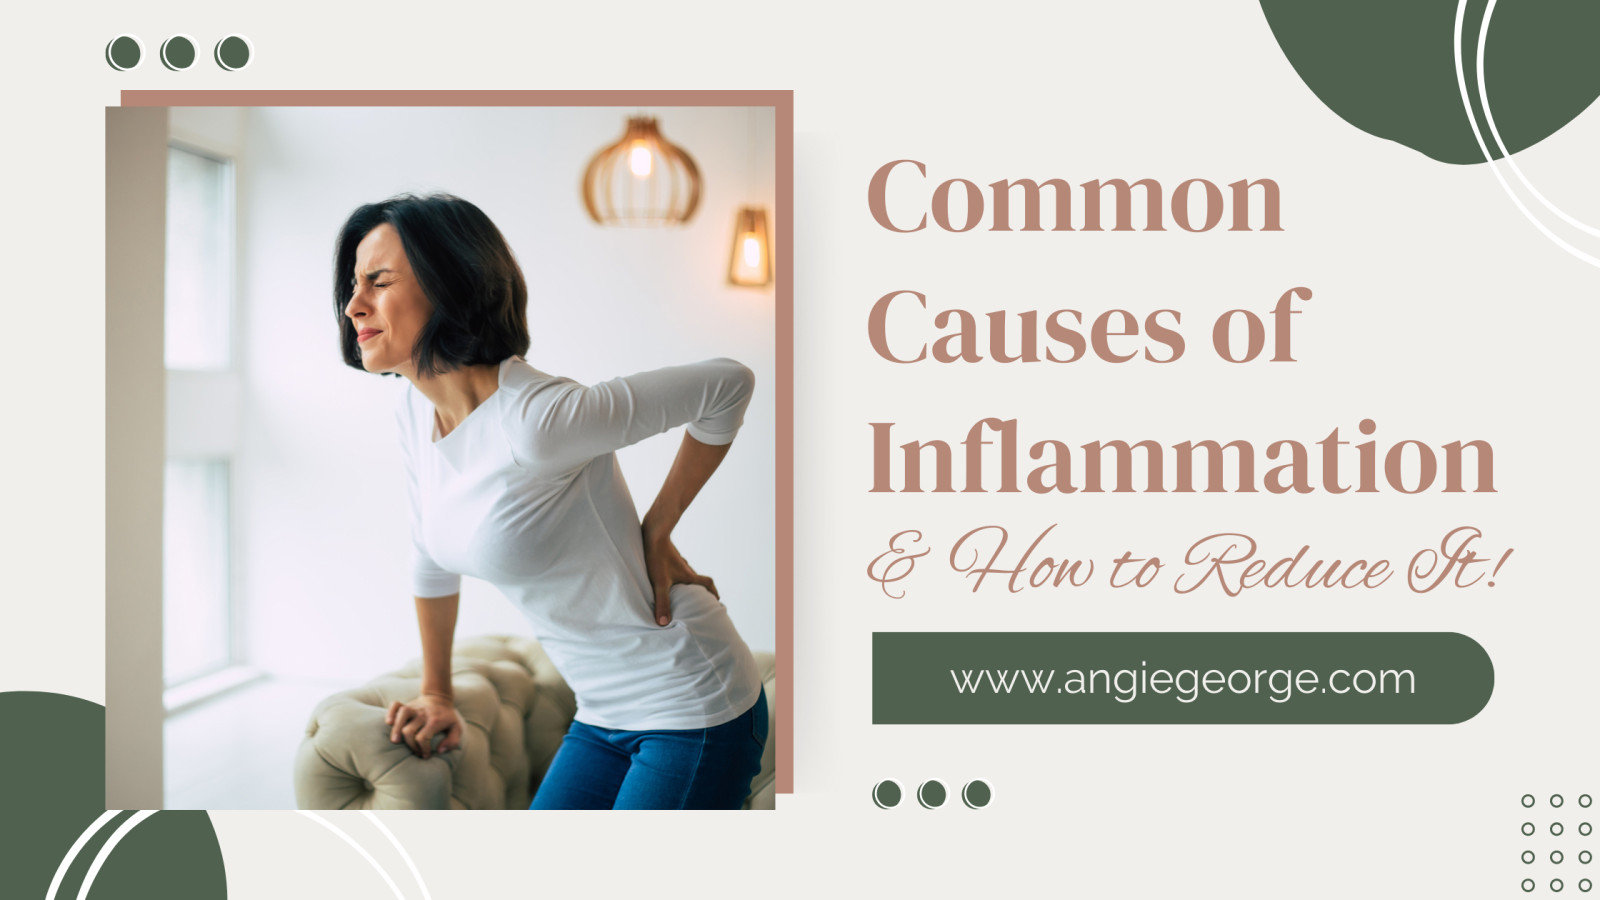 How to Reduce Common Causes of Inflammation